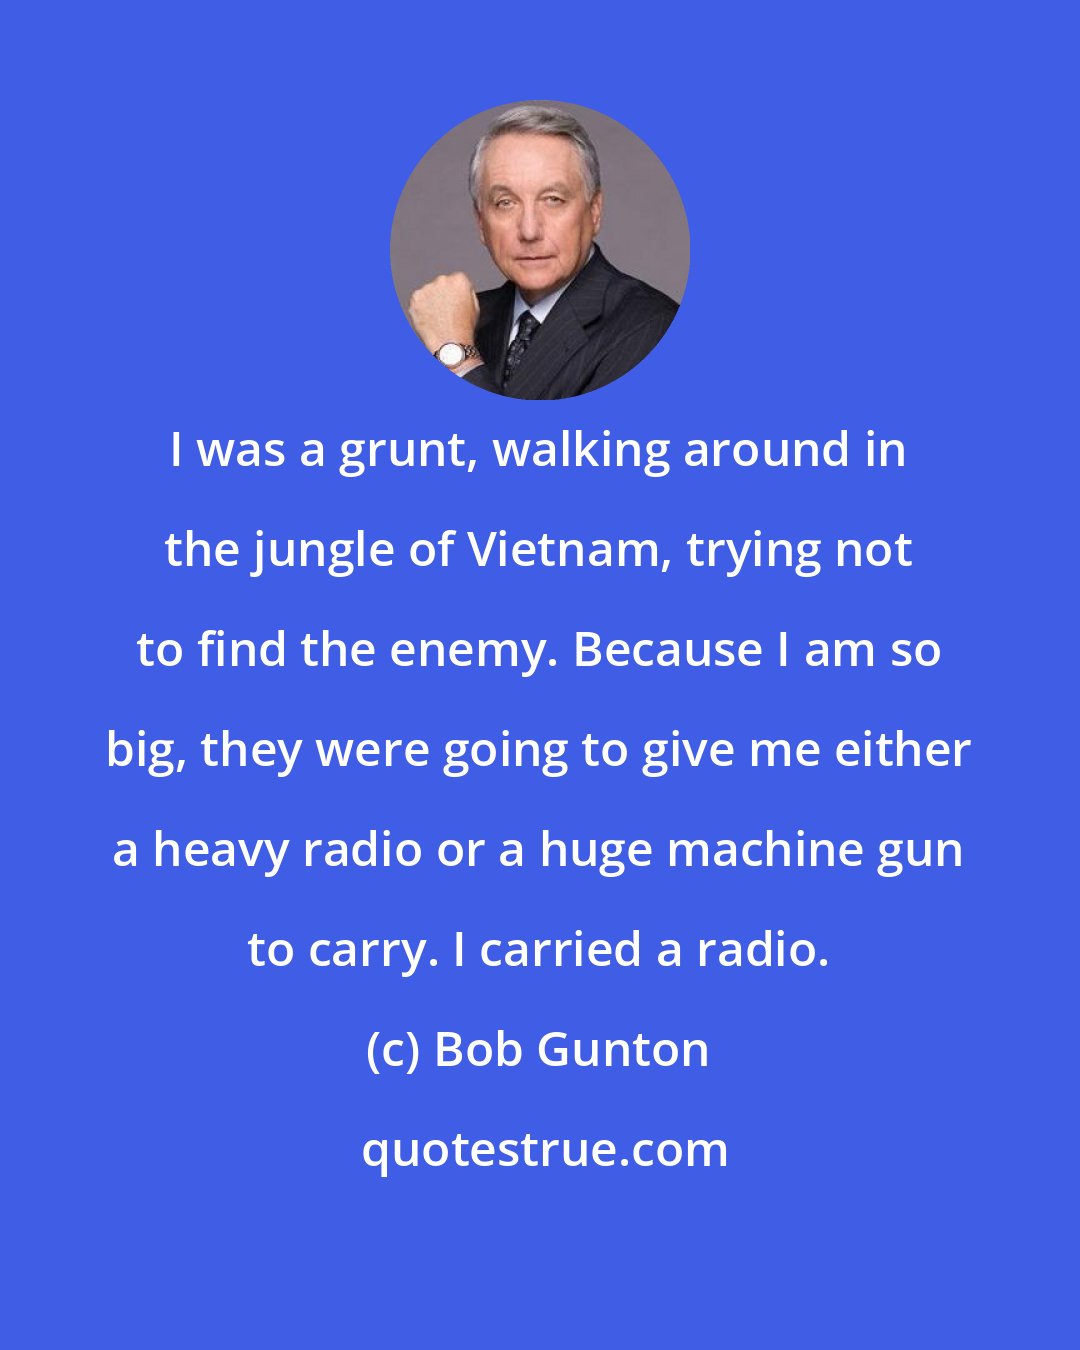 Bob Gunton: I was a grunt, walking around in the jungle of Vietnam, trying not to find the enemy. Because I am so big, they were going to give me either a heavy radio or a huge machine gun to carry. I carried a radio.